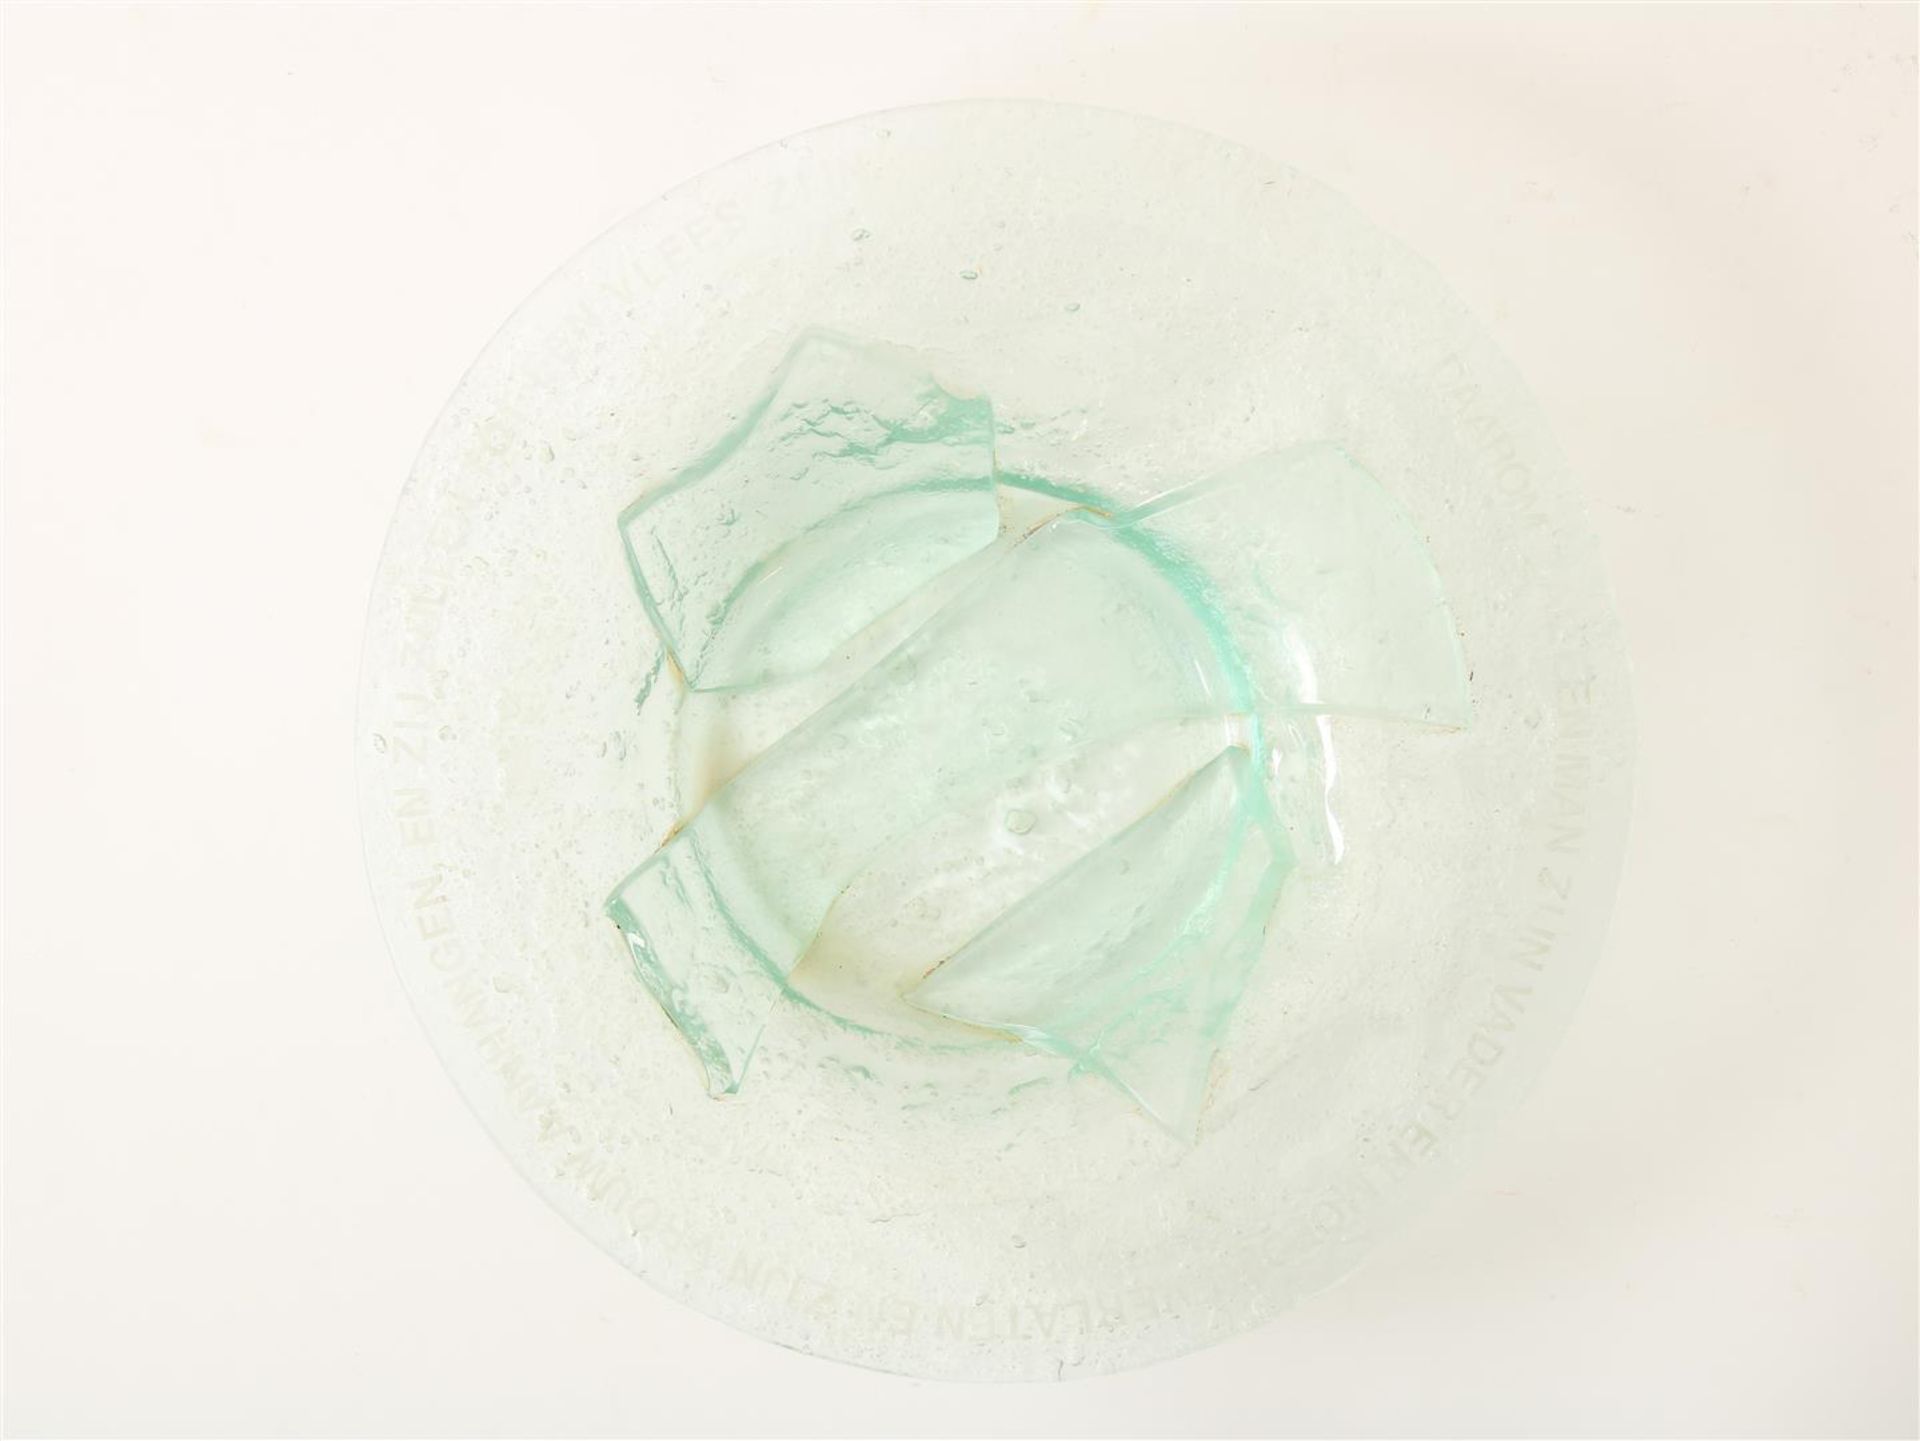 Bowl with trapped air bubbles